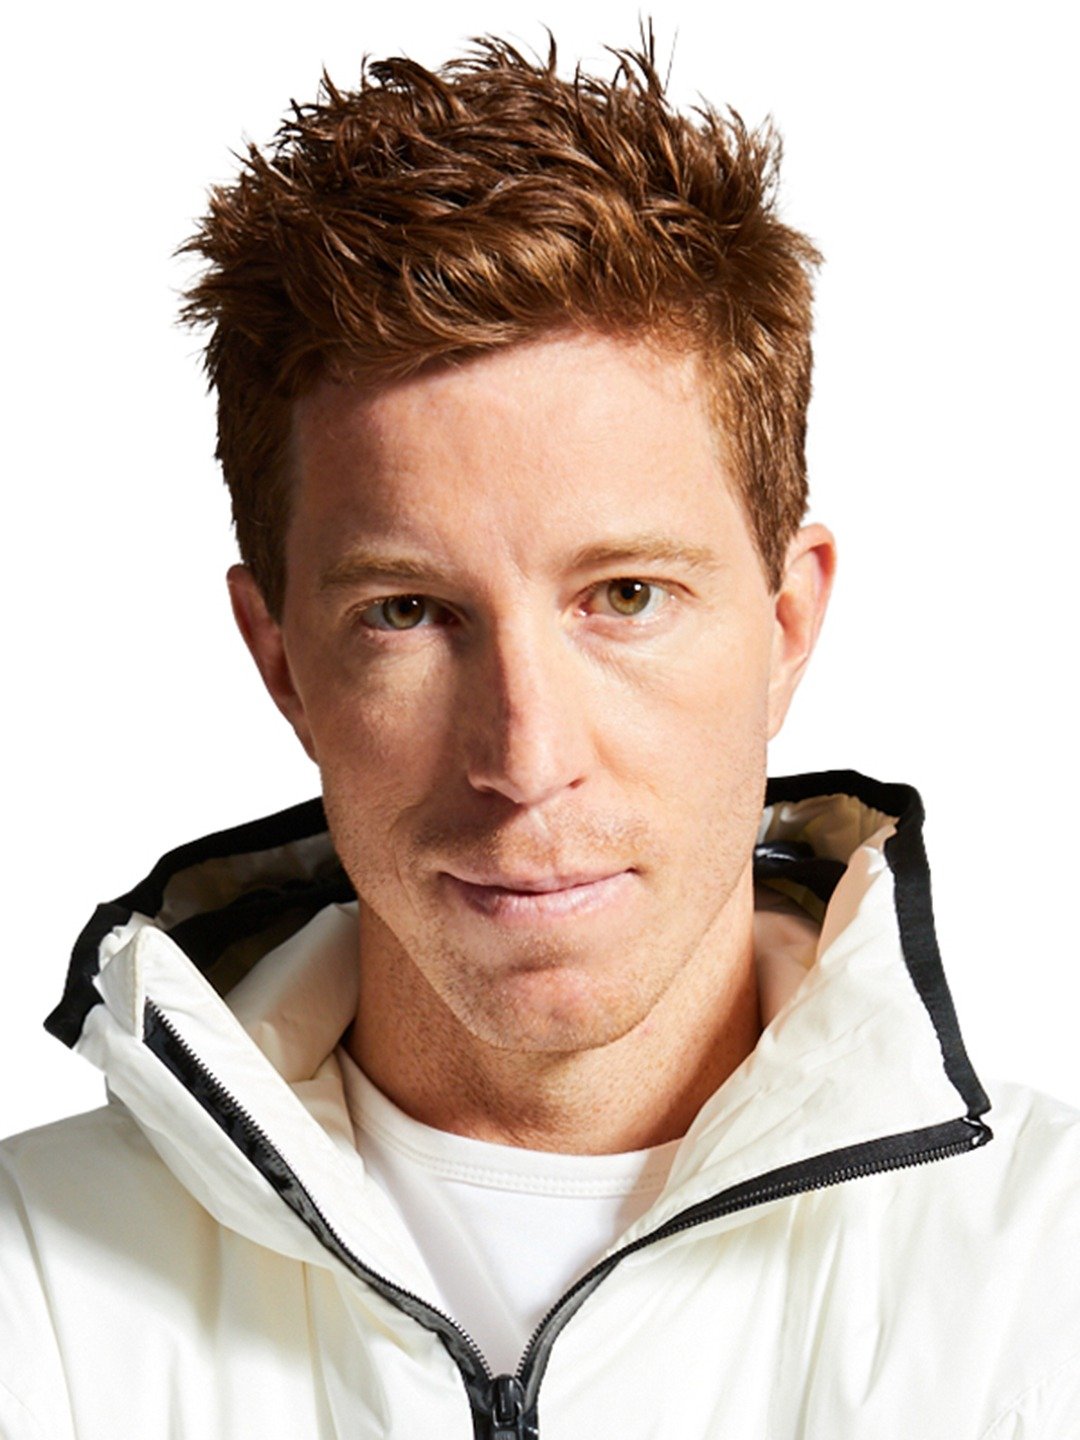 Shaun White wins halfpipe title at US Open in Vermont